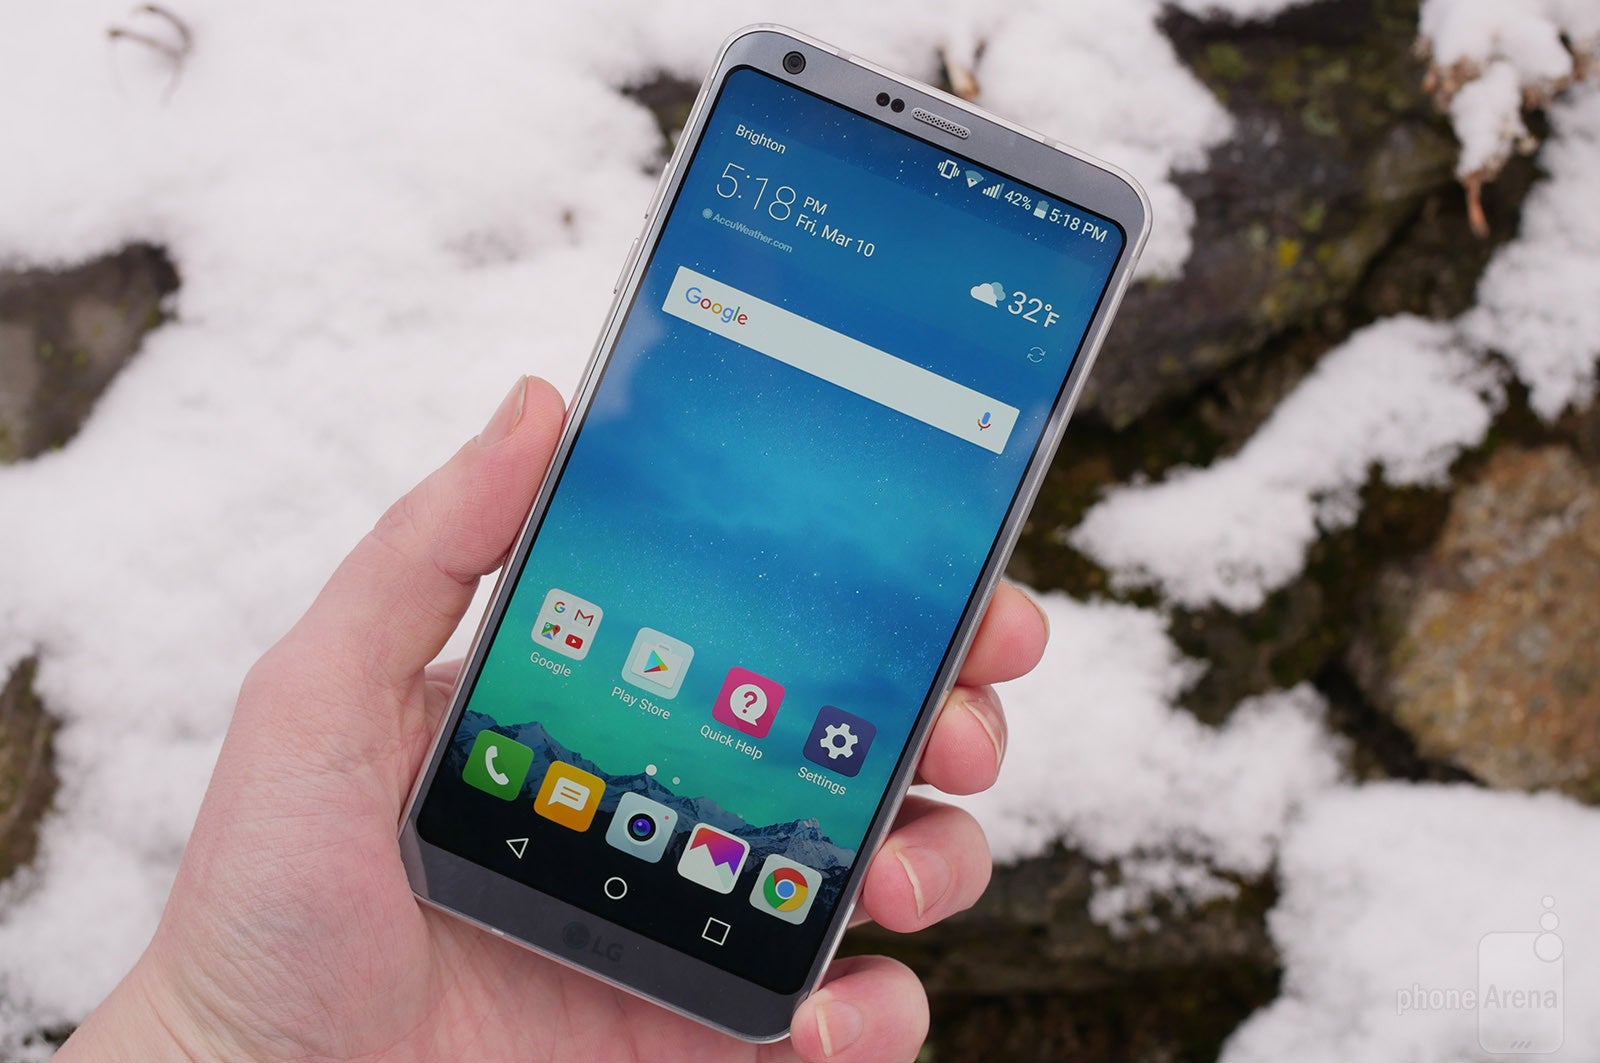 Following the Galaxy S8 reveal, does the LG G6 actually stand a chance on the market?